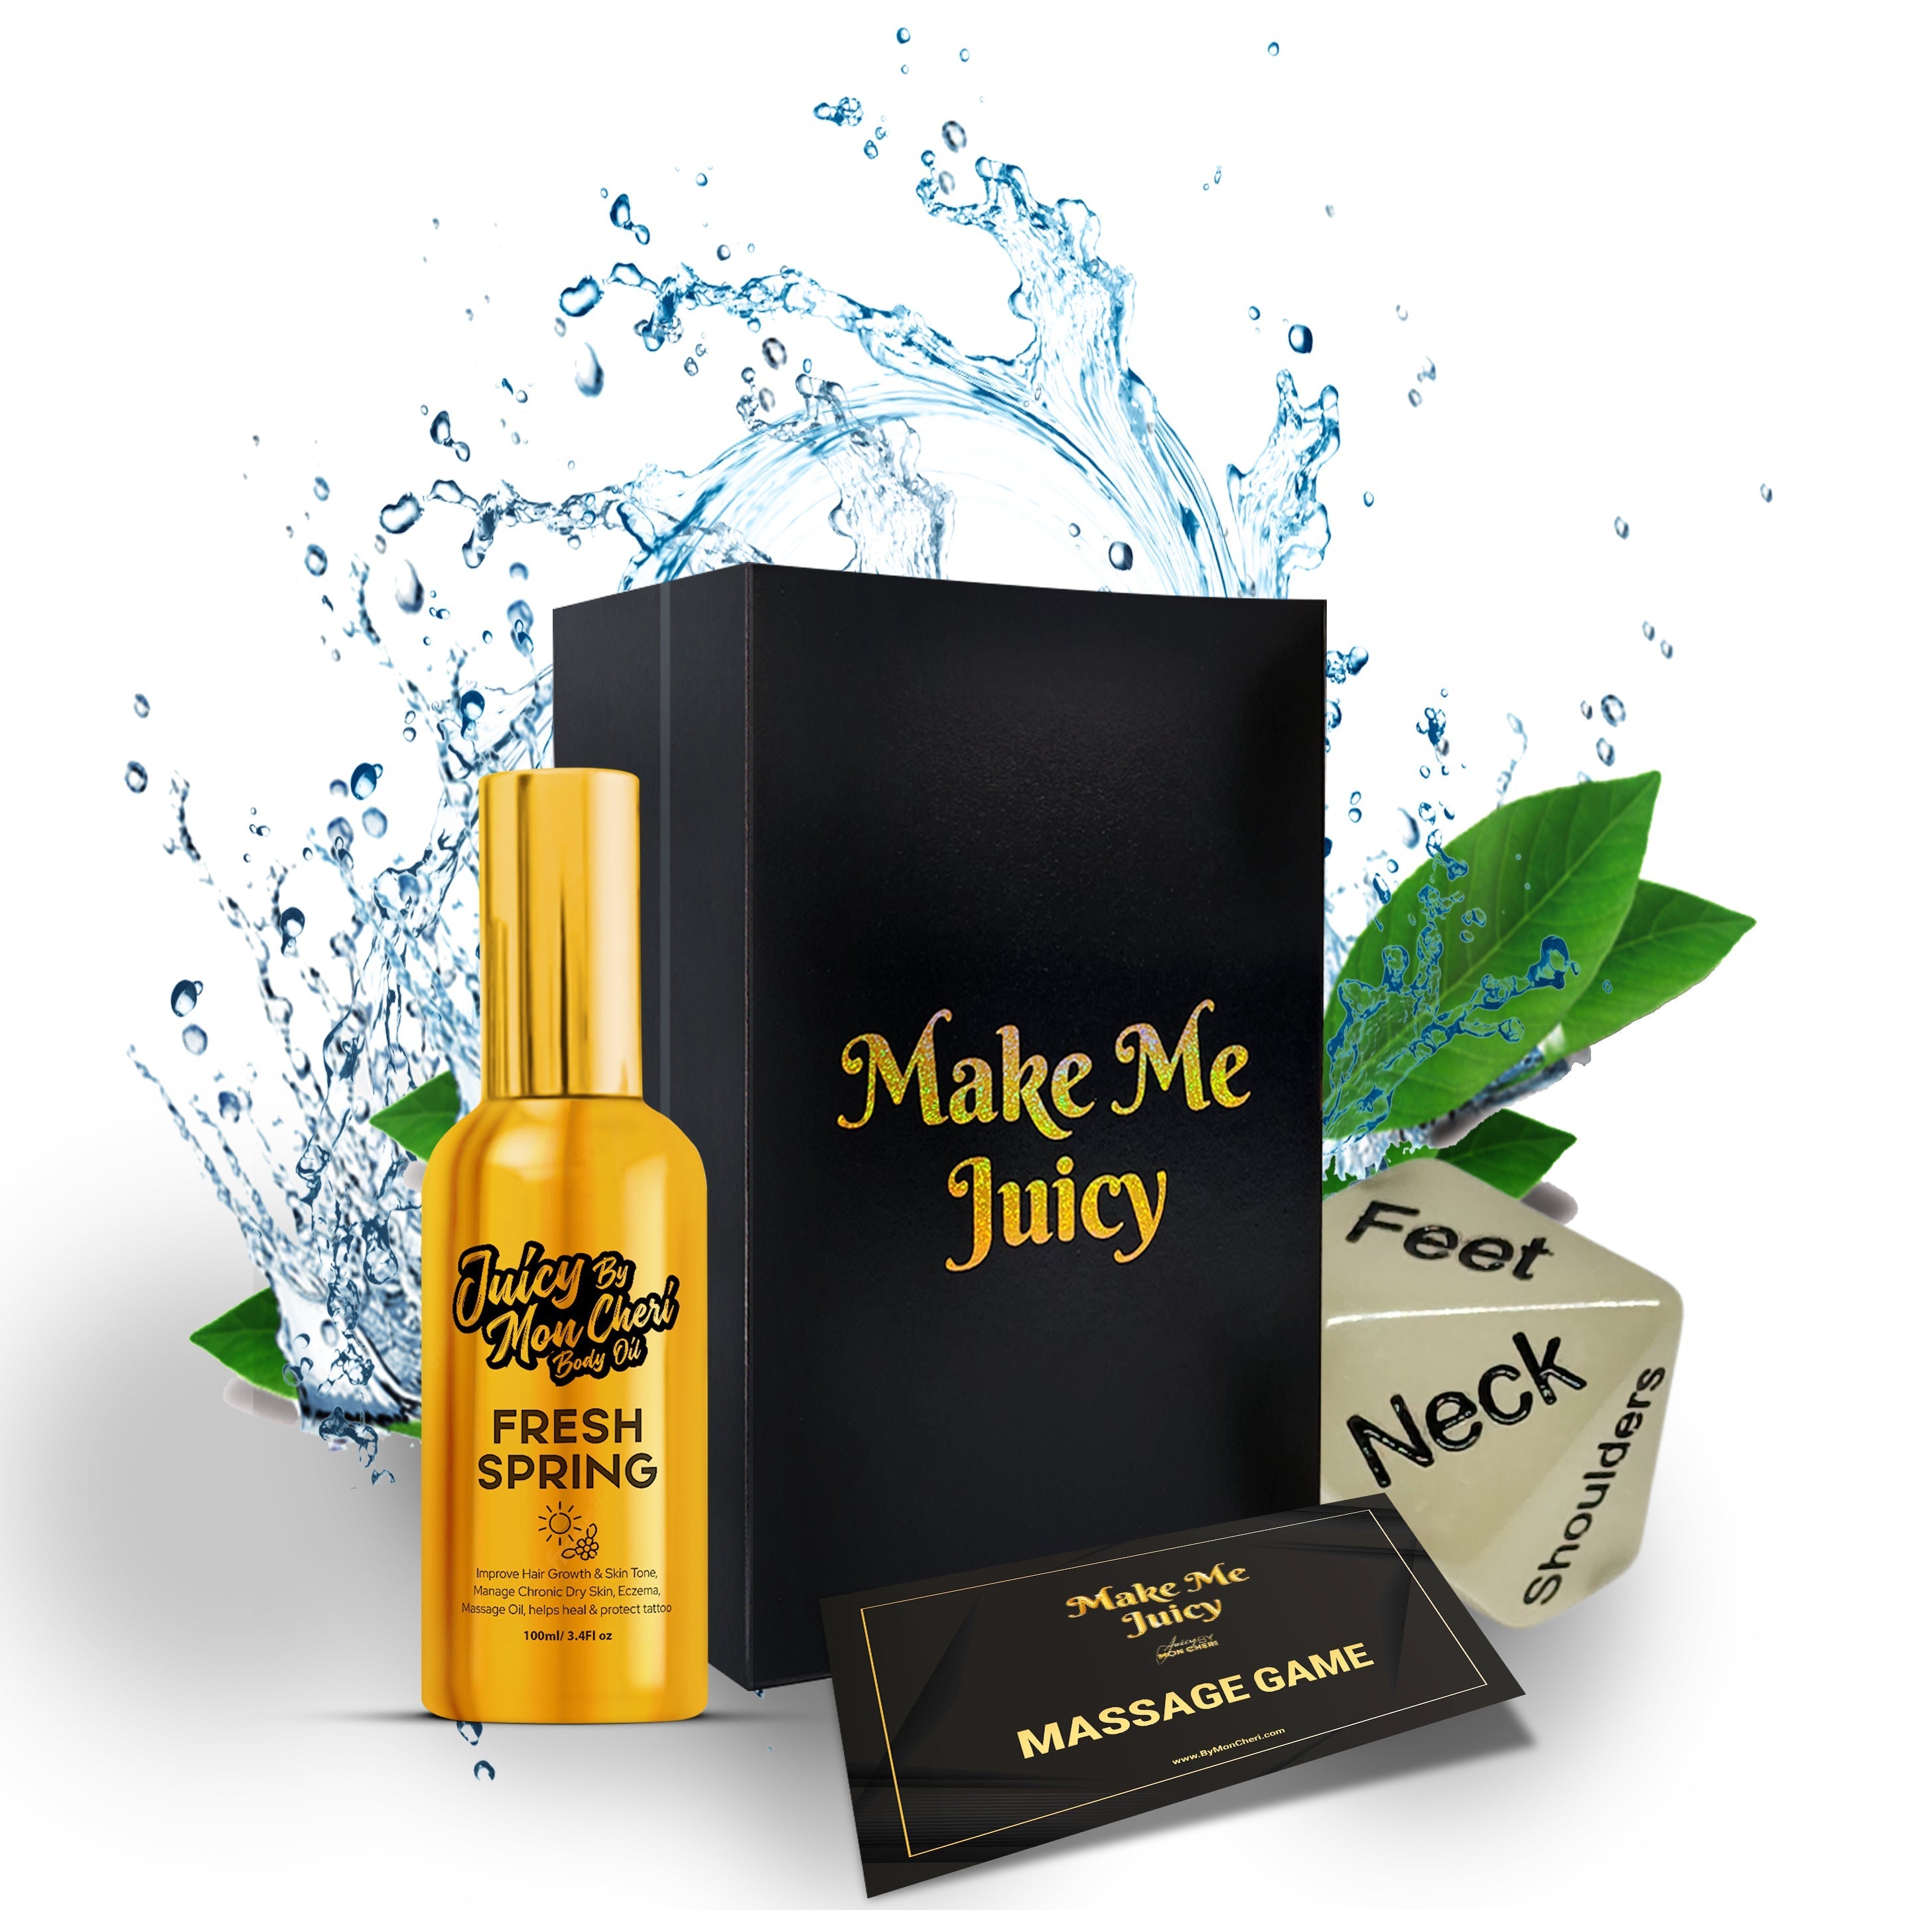 Massage Oil: Unleash Fun with Juicy by Mon Cheri's Couples Massage Oil and Rolling Dice Game